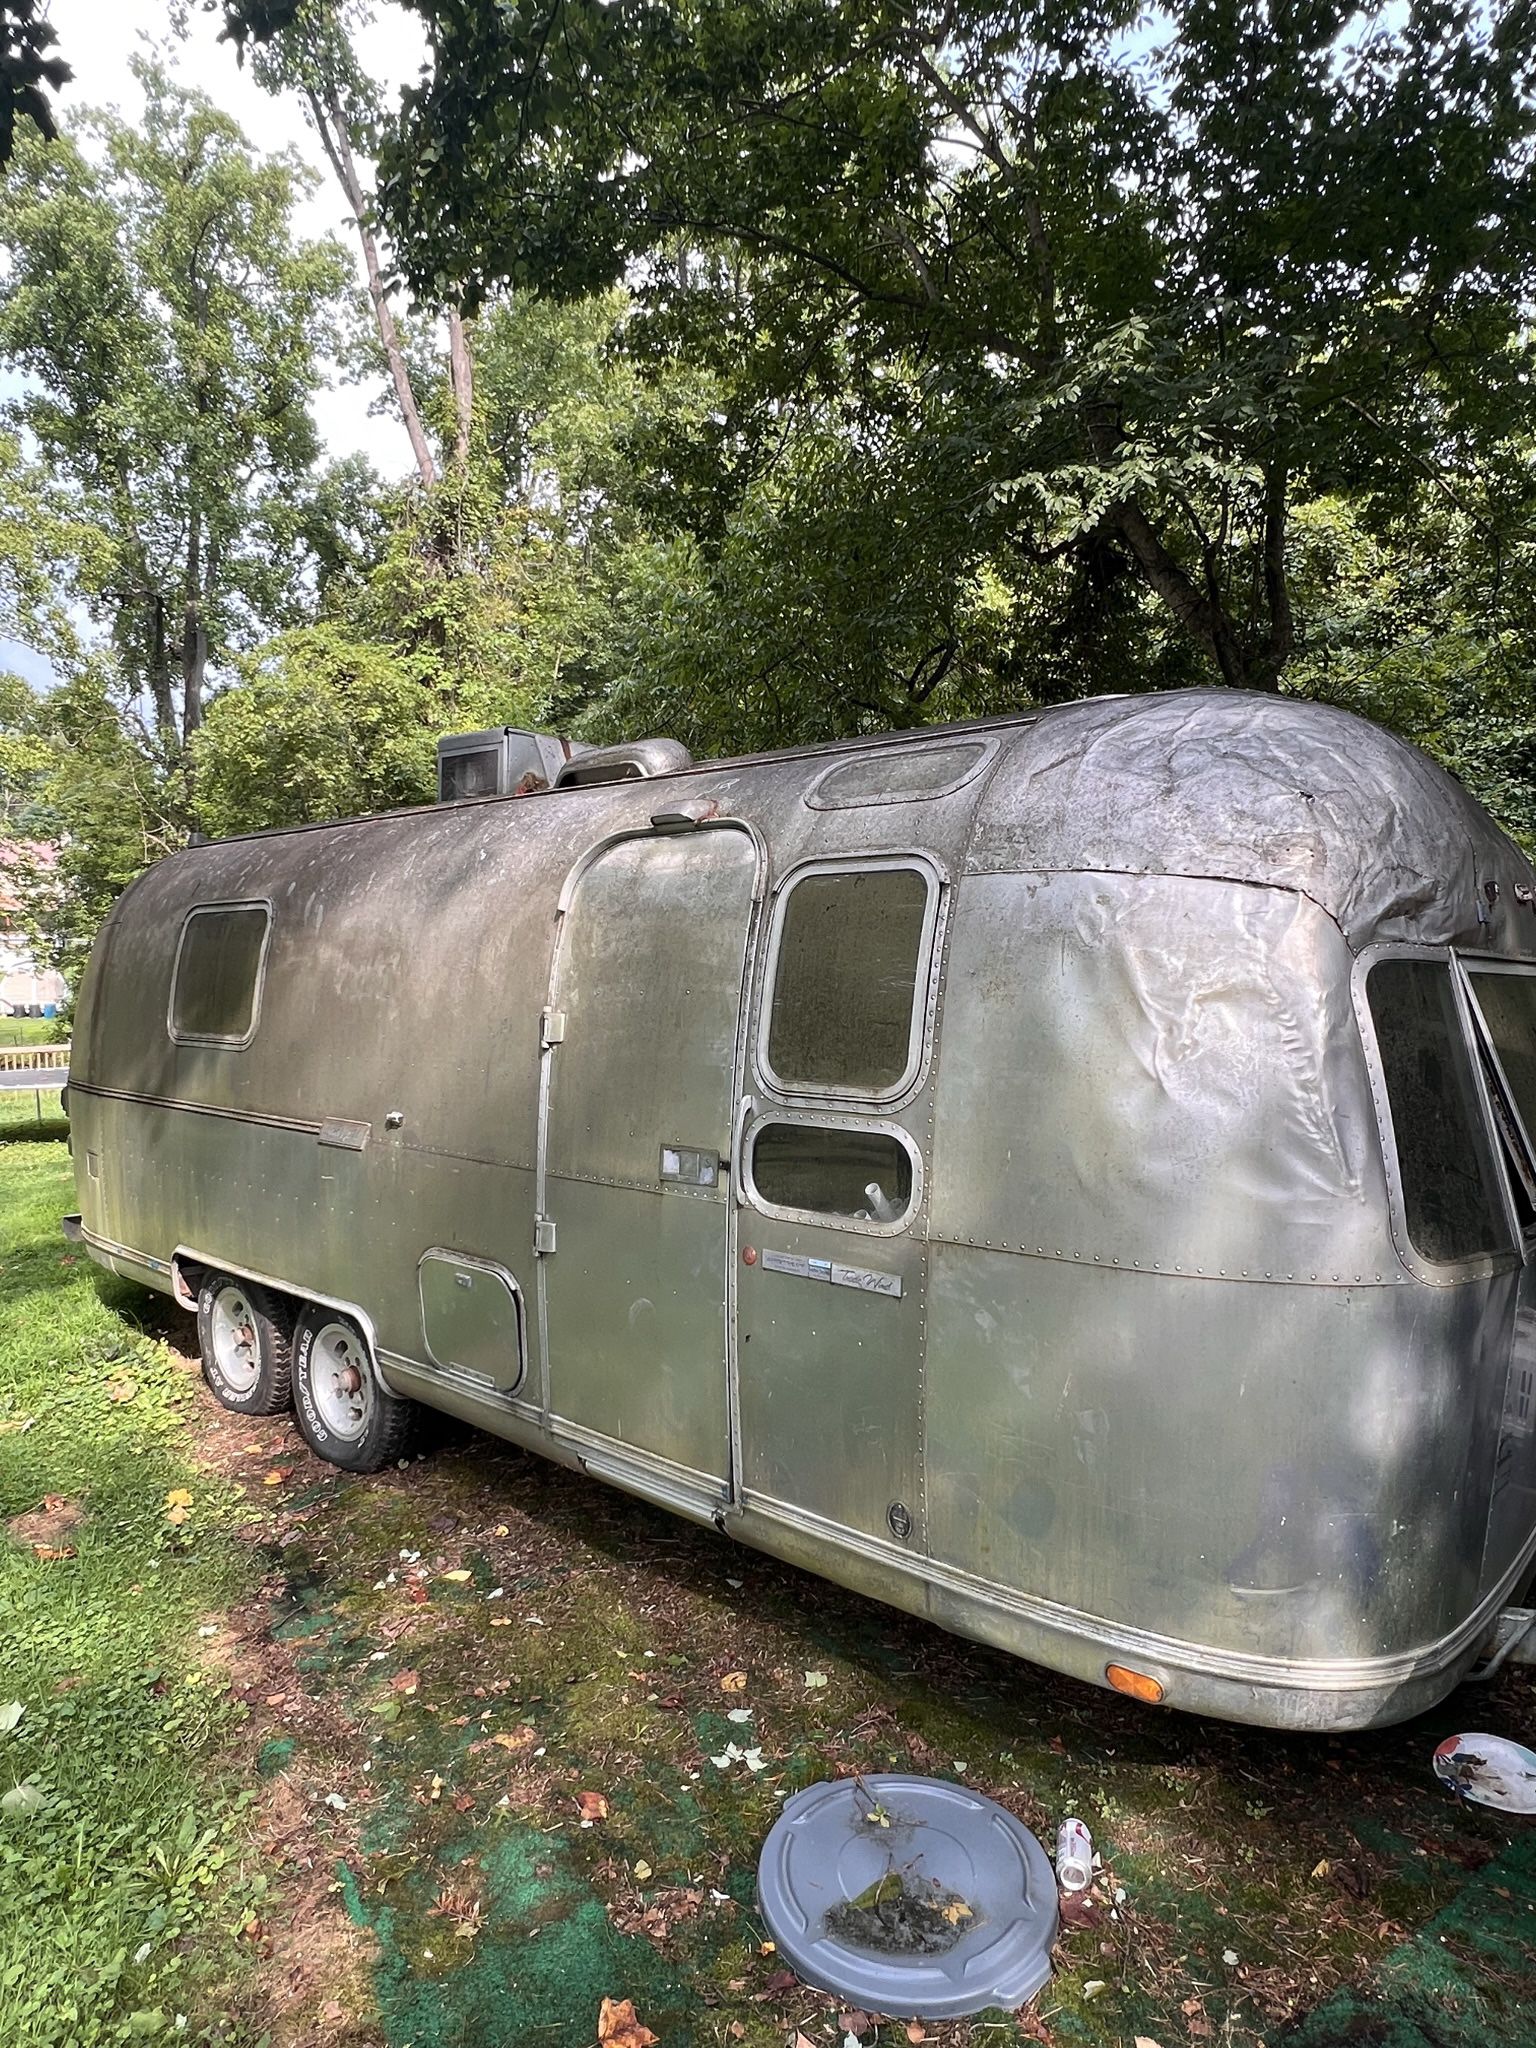 Gutted Airstream For sale Or trade